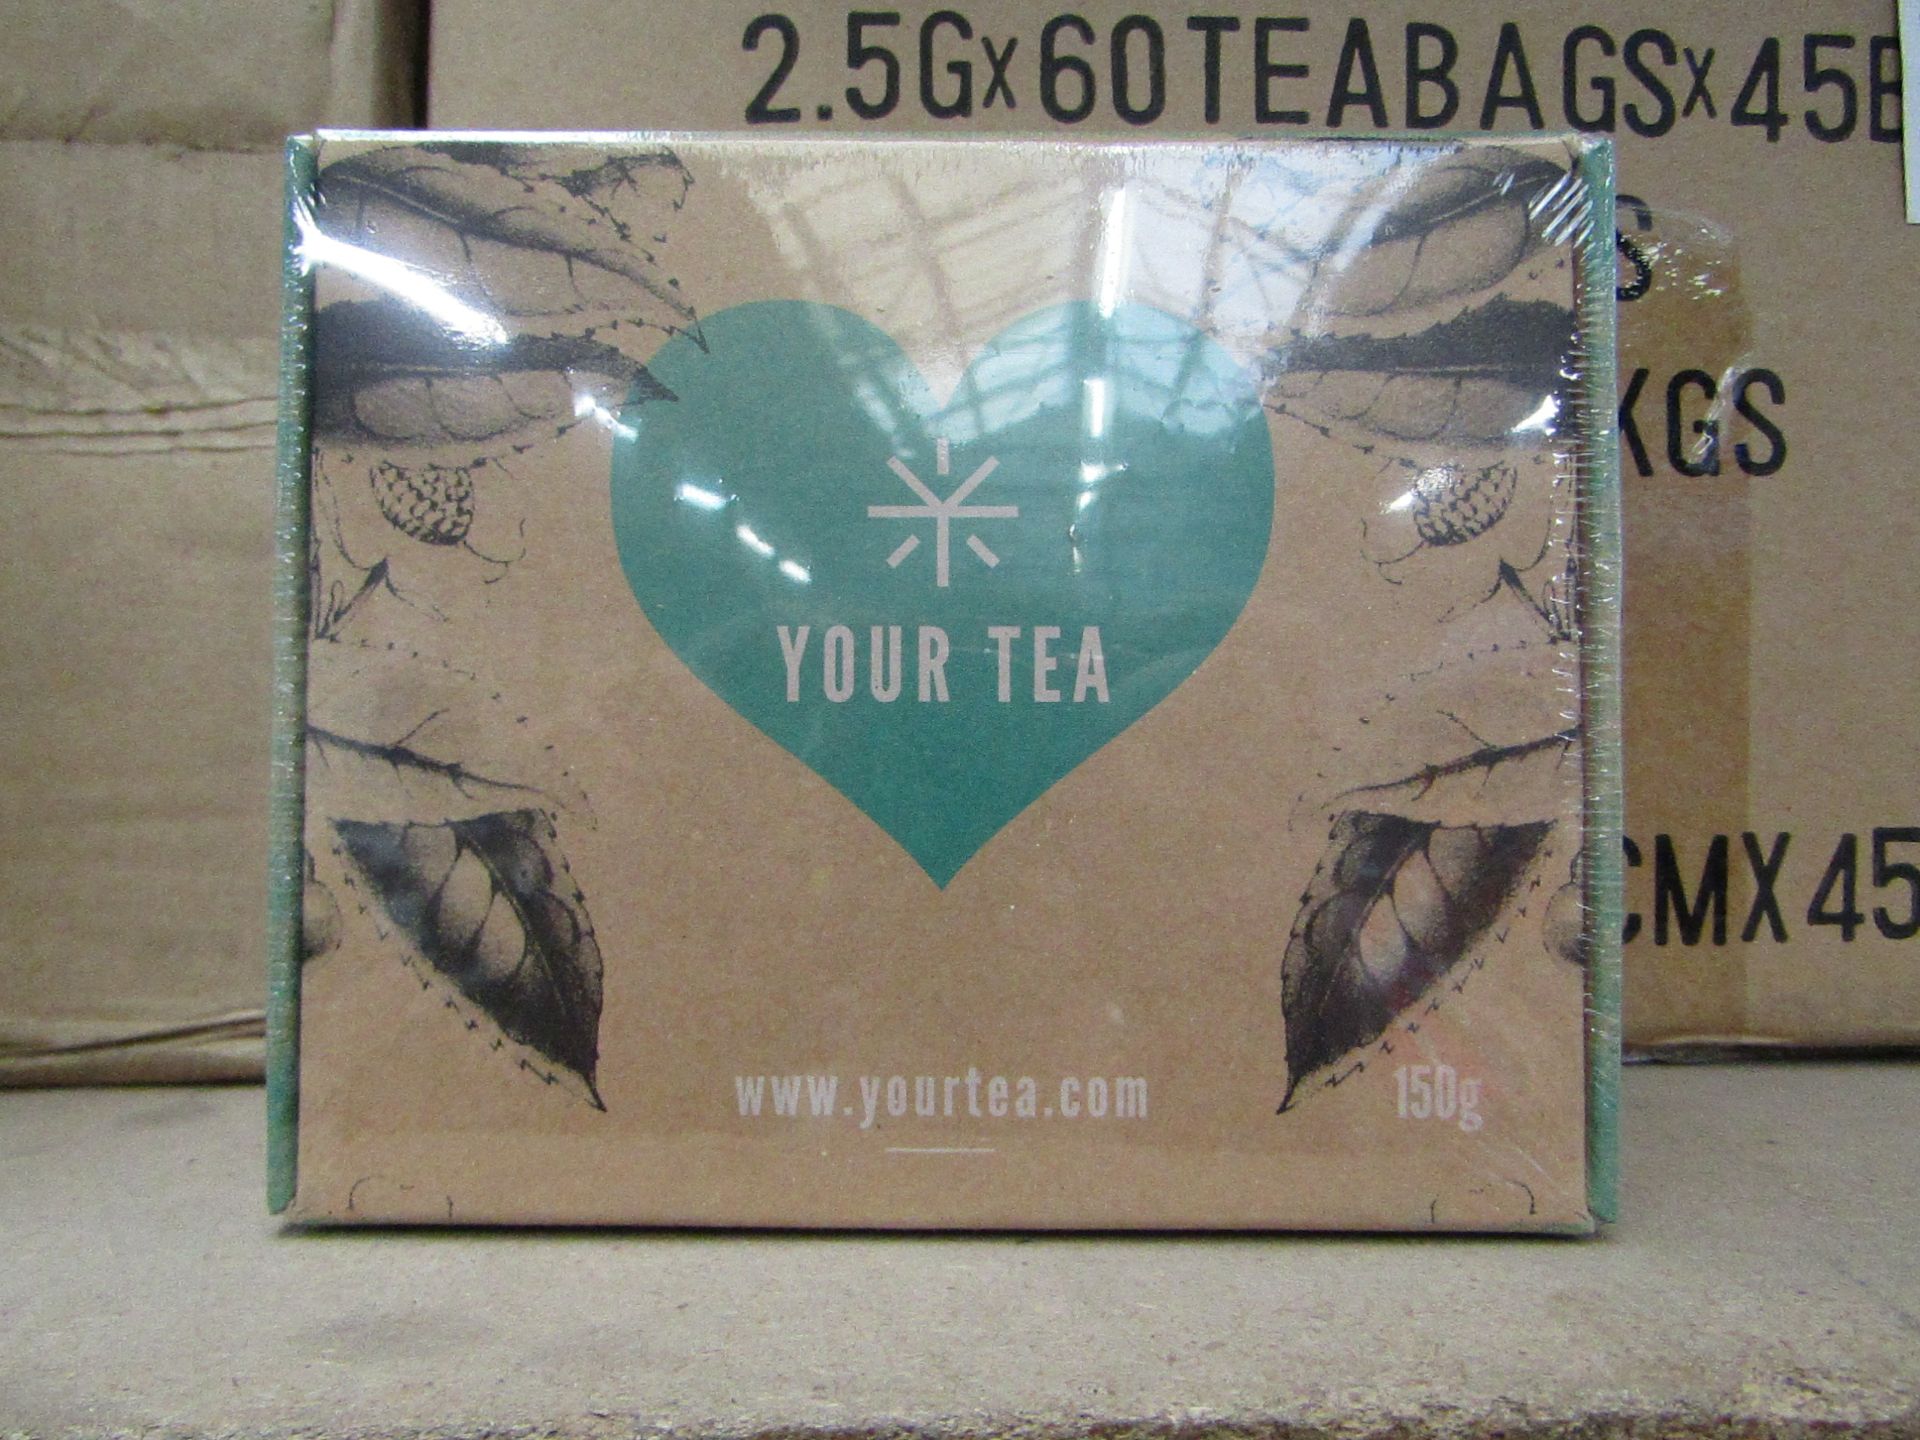 6 x Boxes of Tiny Tea, each box has 84 Tea bags, Best Before 15.5.2019 the boxes are still sealed